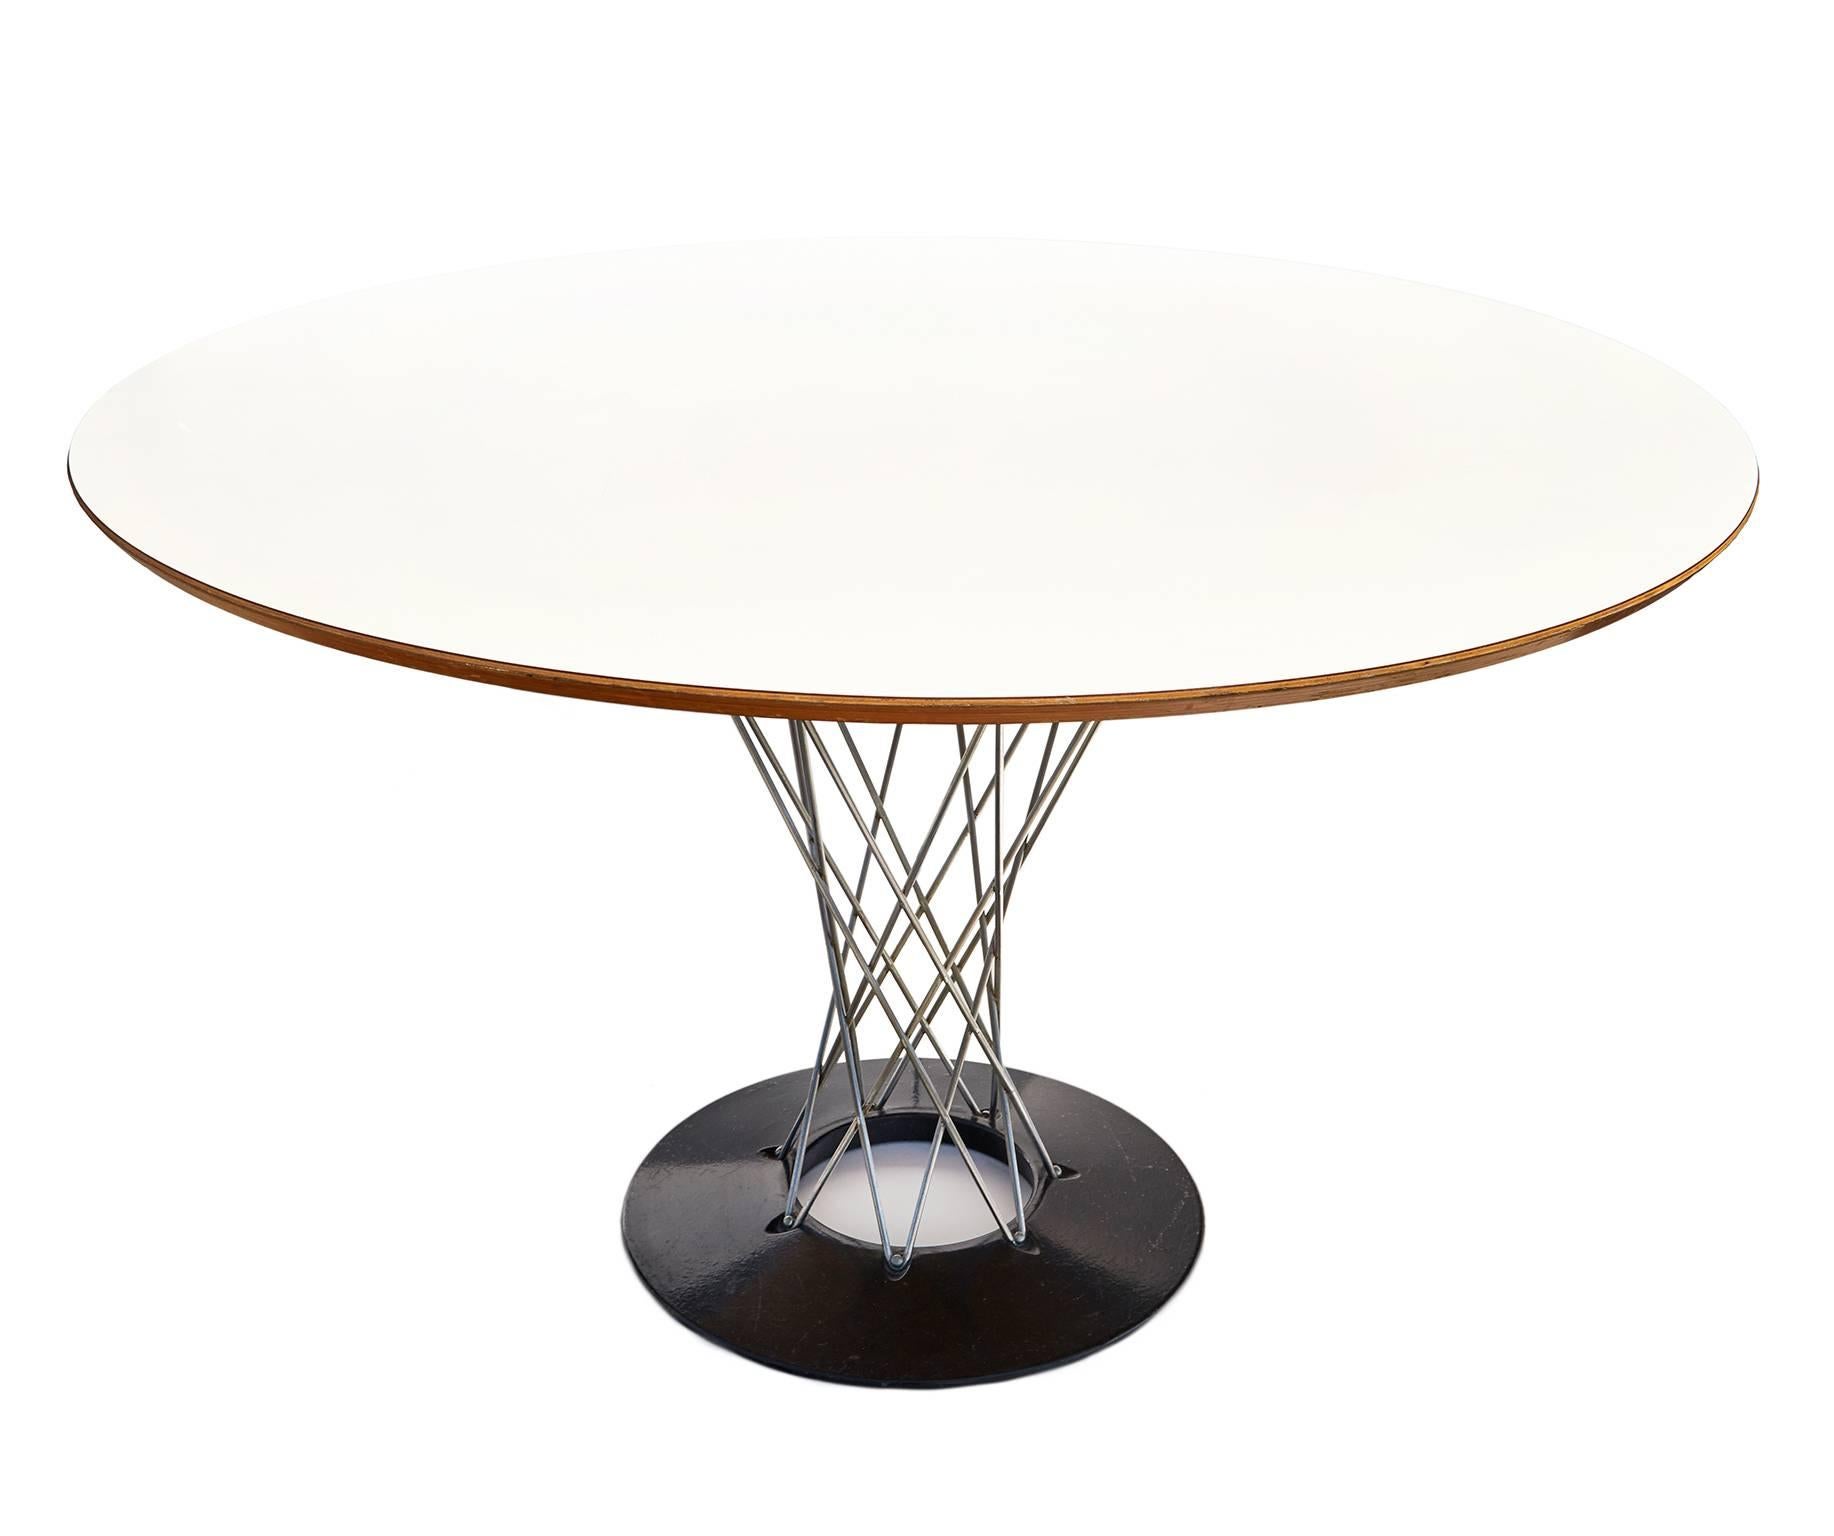 A rather well-preserved example of Noguchi's Classic modernist table, which retains a Knoll label dating the piece to the early 1960s -- only a few years after 1957, when the Cyclone was first offered by the innovative company. This is the